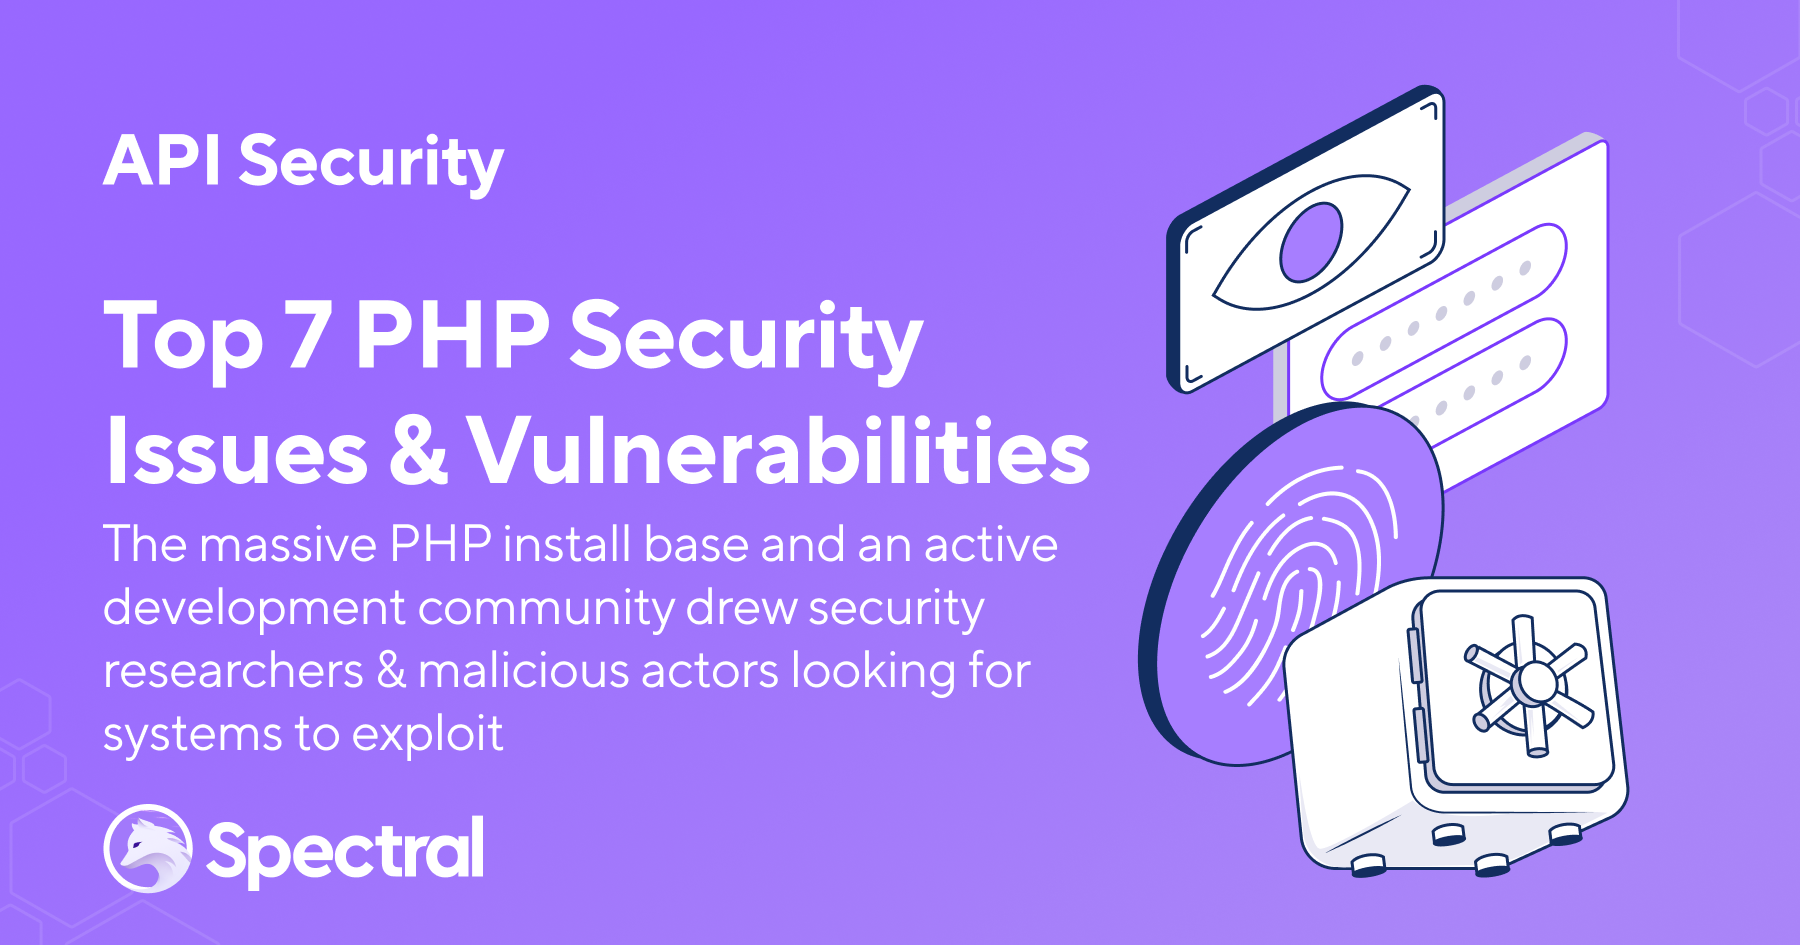 Abnorm fjols Overlegenhed Top 7 PHP Security Issues And Vulnerabilities - Spectral